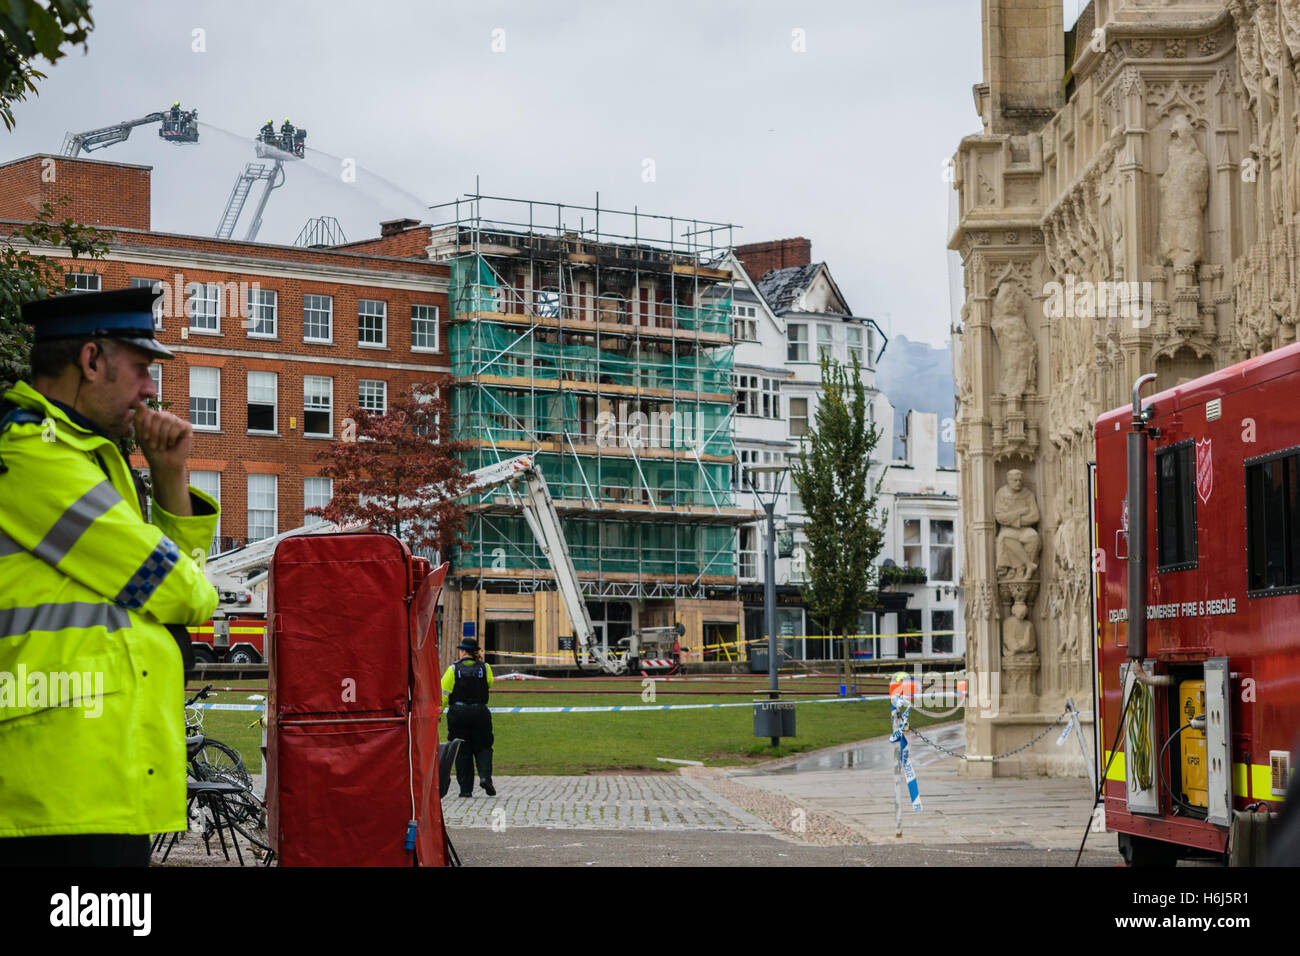 Exeter, Devon, England, UK - 29 October 2016: Concerned policeman at the Cathedral green look at what is left of the oldest hotel in England, Royal Clarence Hotel. Credit: Cristina Neacsu/Alamy Live News Stock Photo